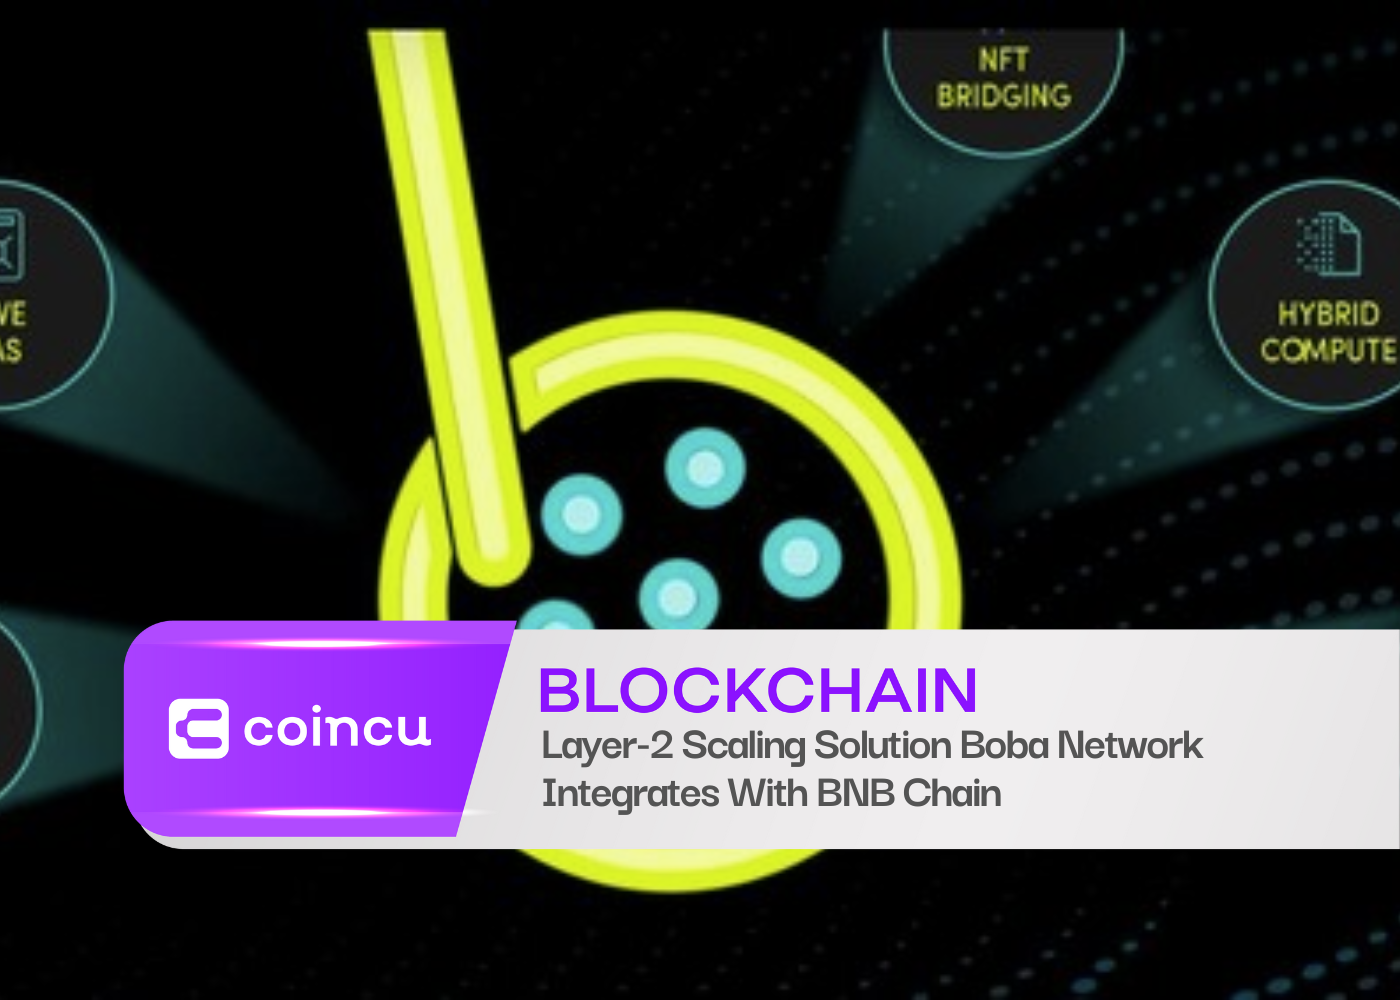 Layer-2 Scaling Solution Boba Network Integrates With BNB Chain